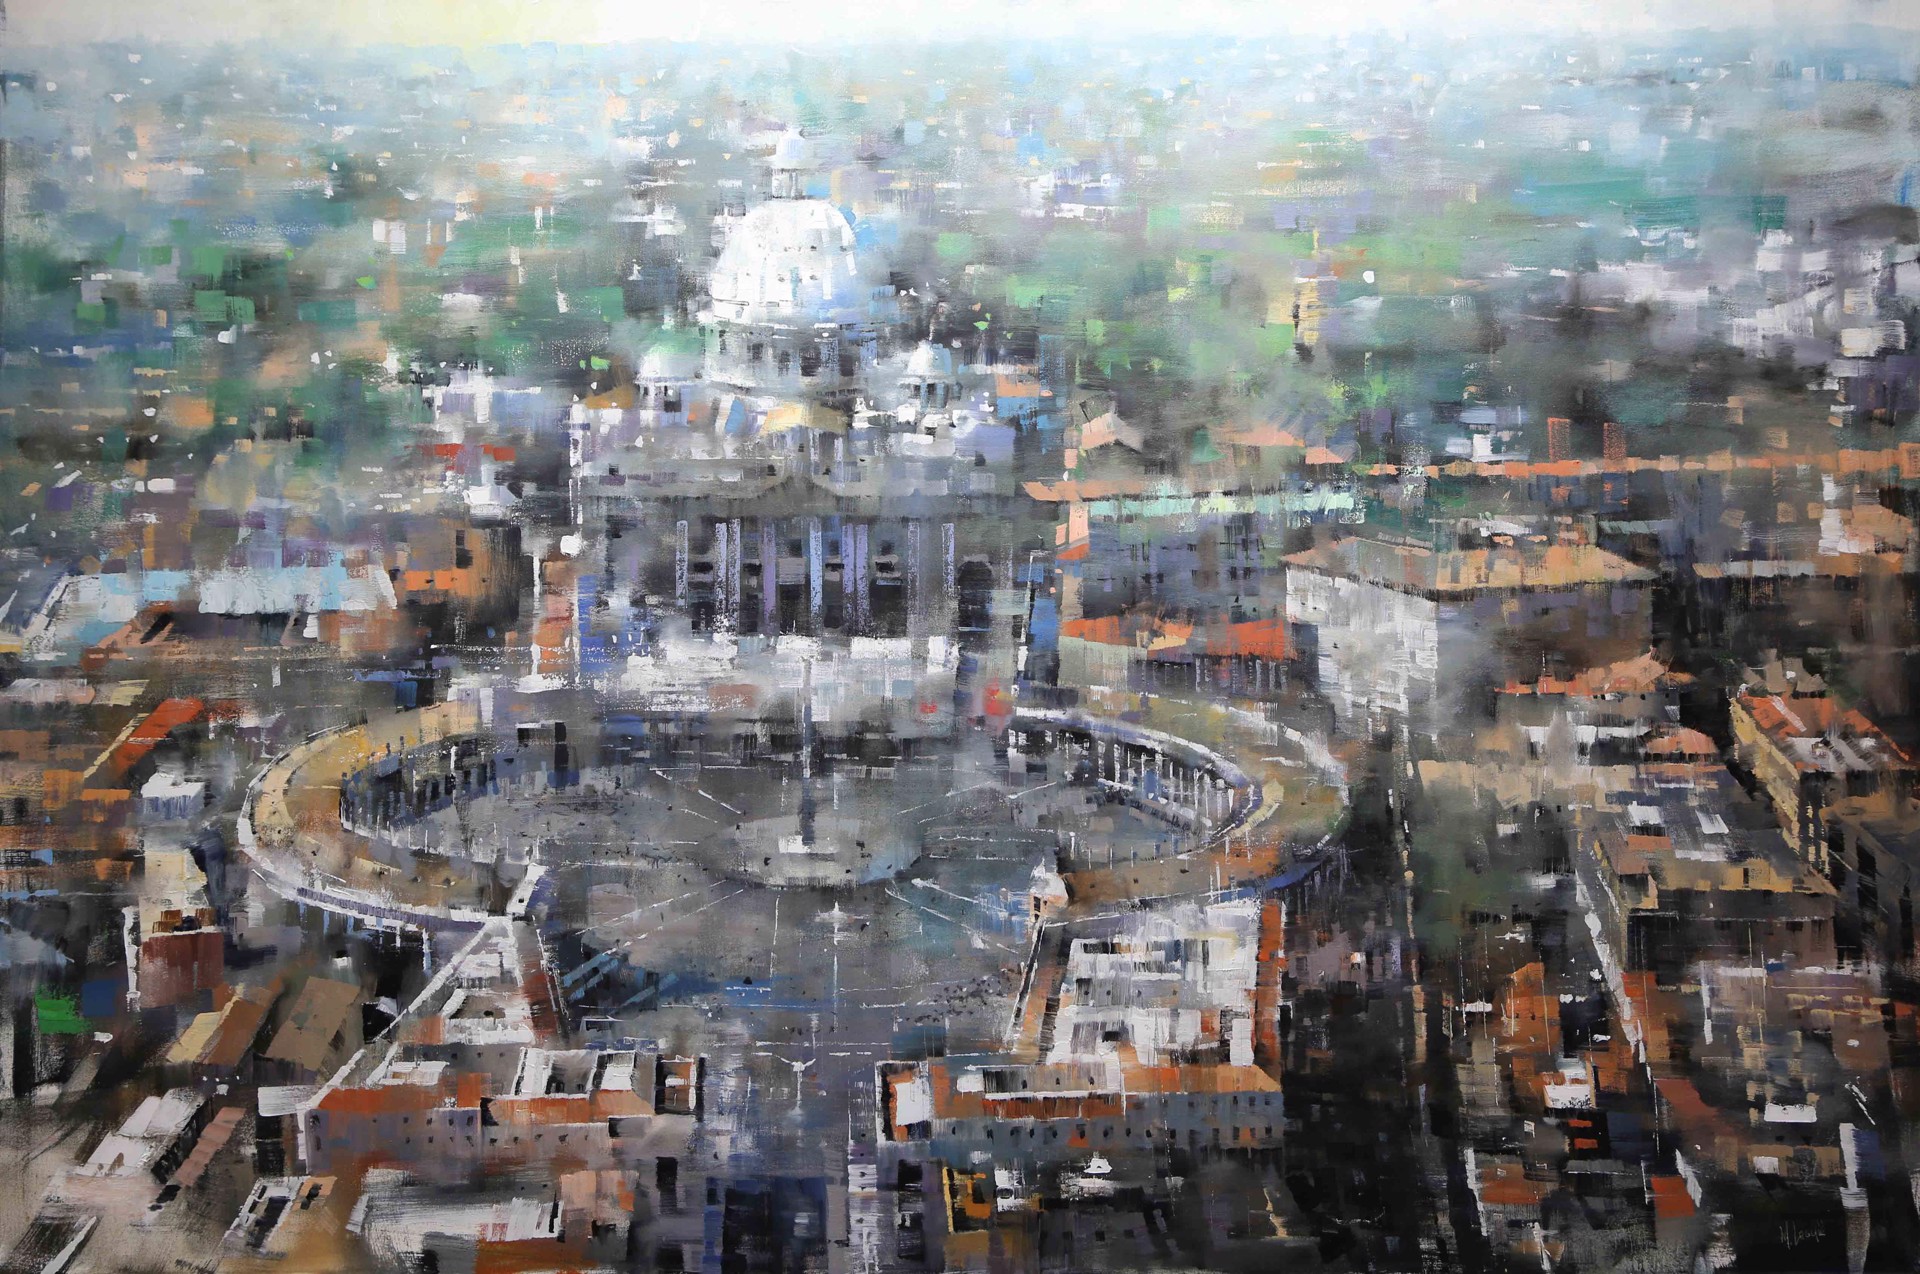 Over Vatican City by MARK LAGUE